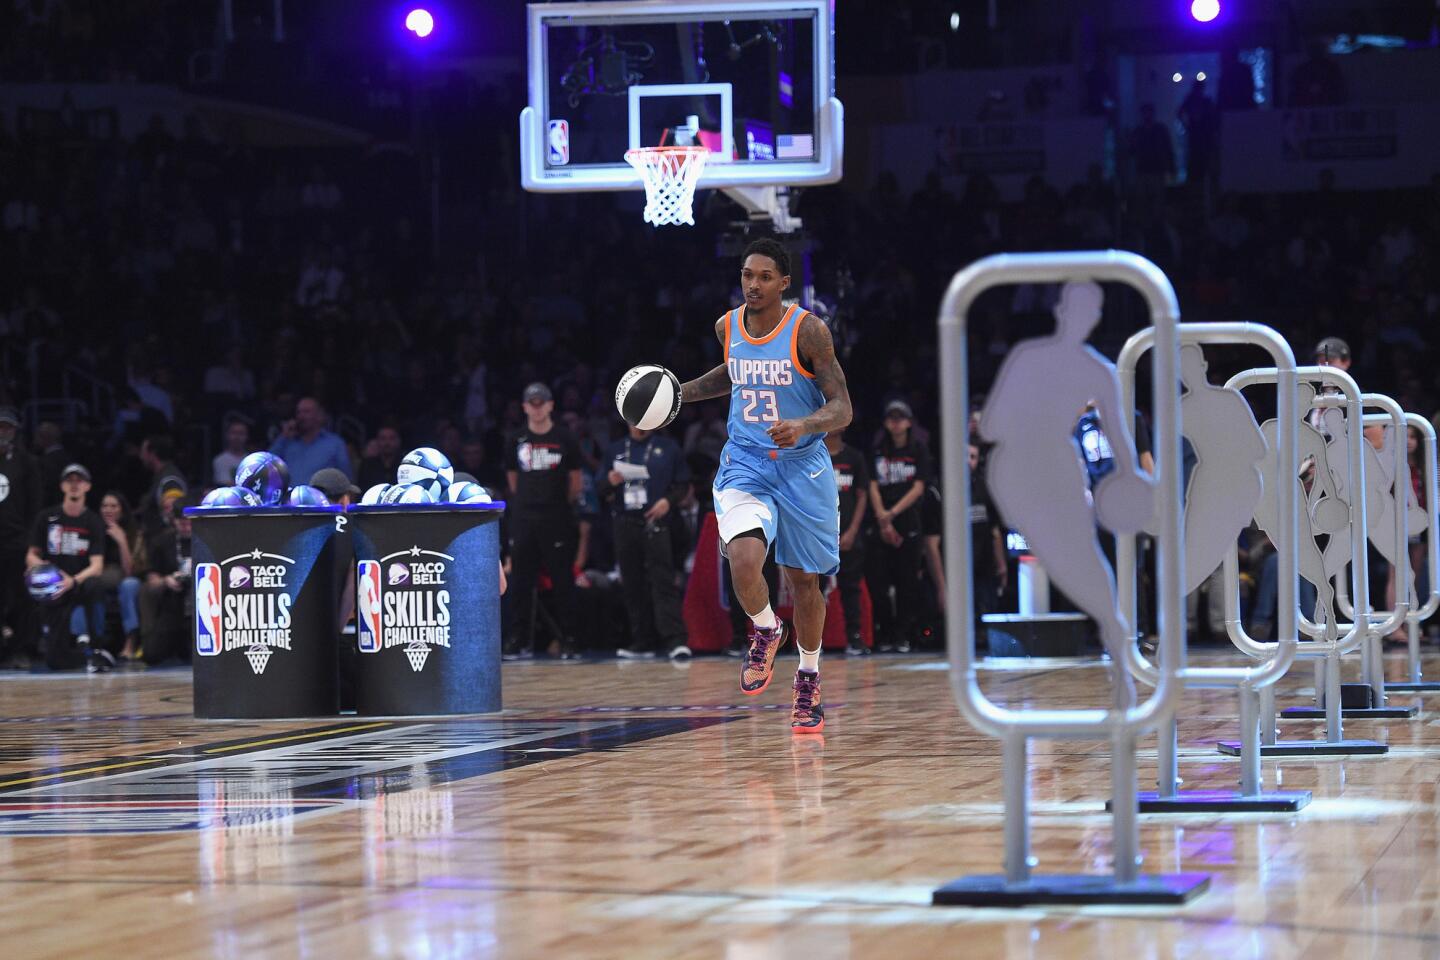 For Compton native DeMar DeRozan, All-Star game in L.A. was 'dream